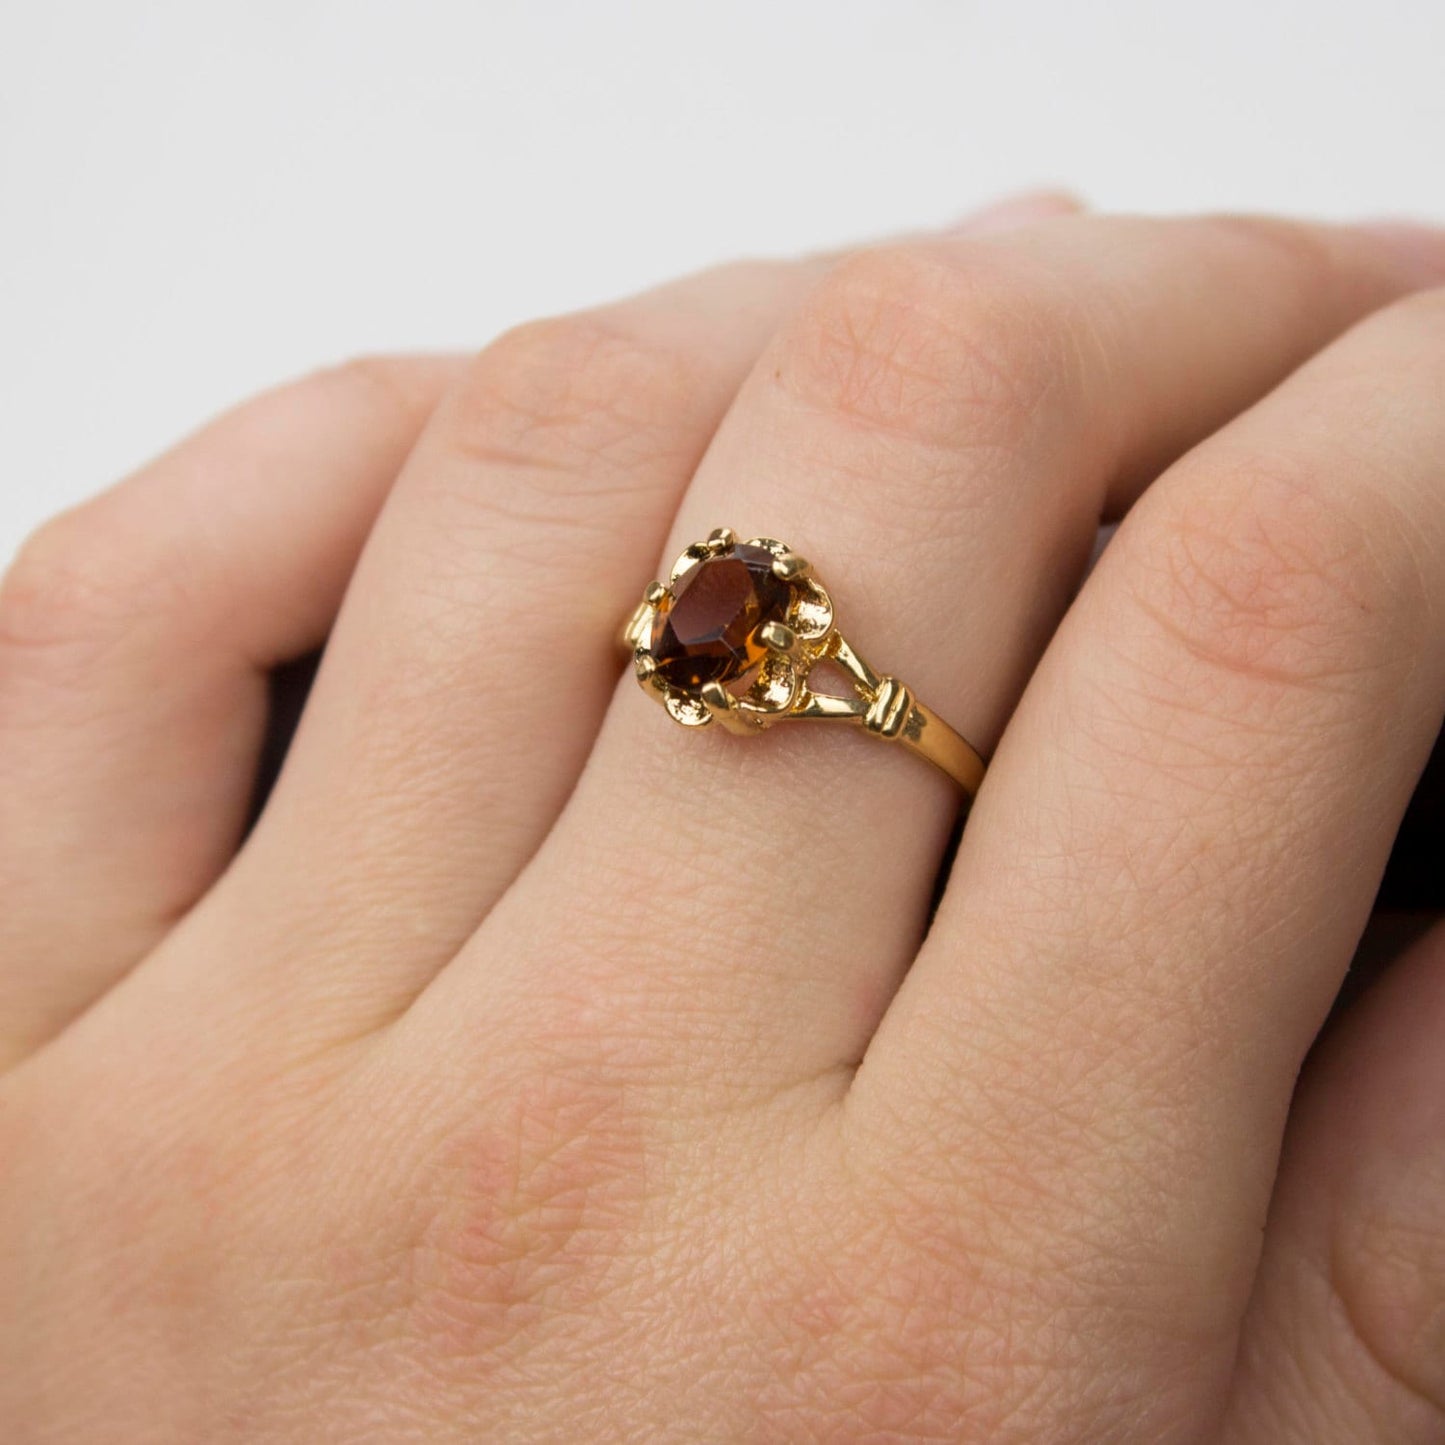 Vintage Ring 1970s Smoky Topaz Solitaire Ring 18k Gold November Birthstone Antique Womans Jewlery #R555 - Limited Stock - Never Worn